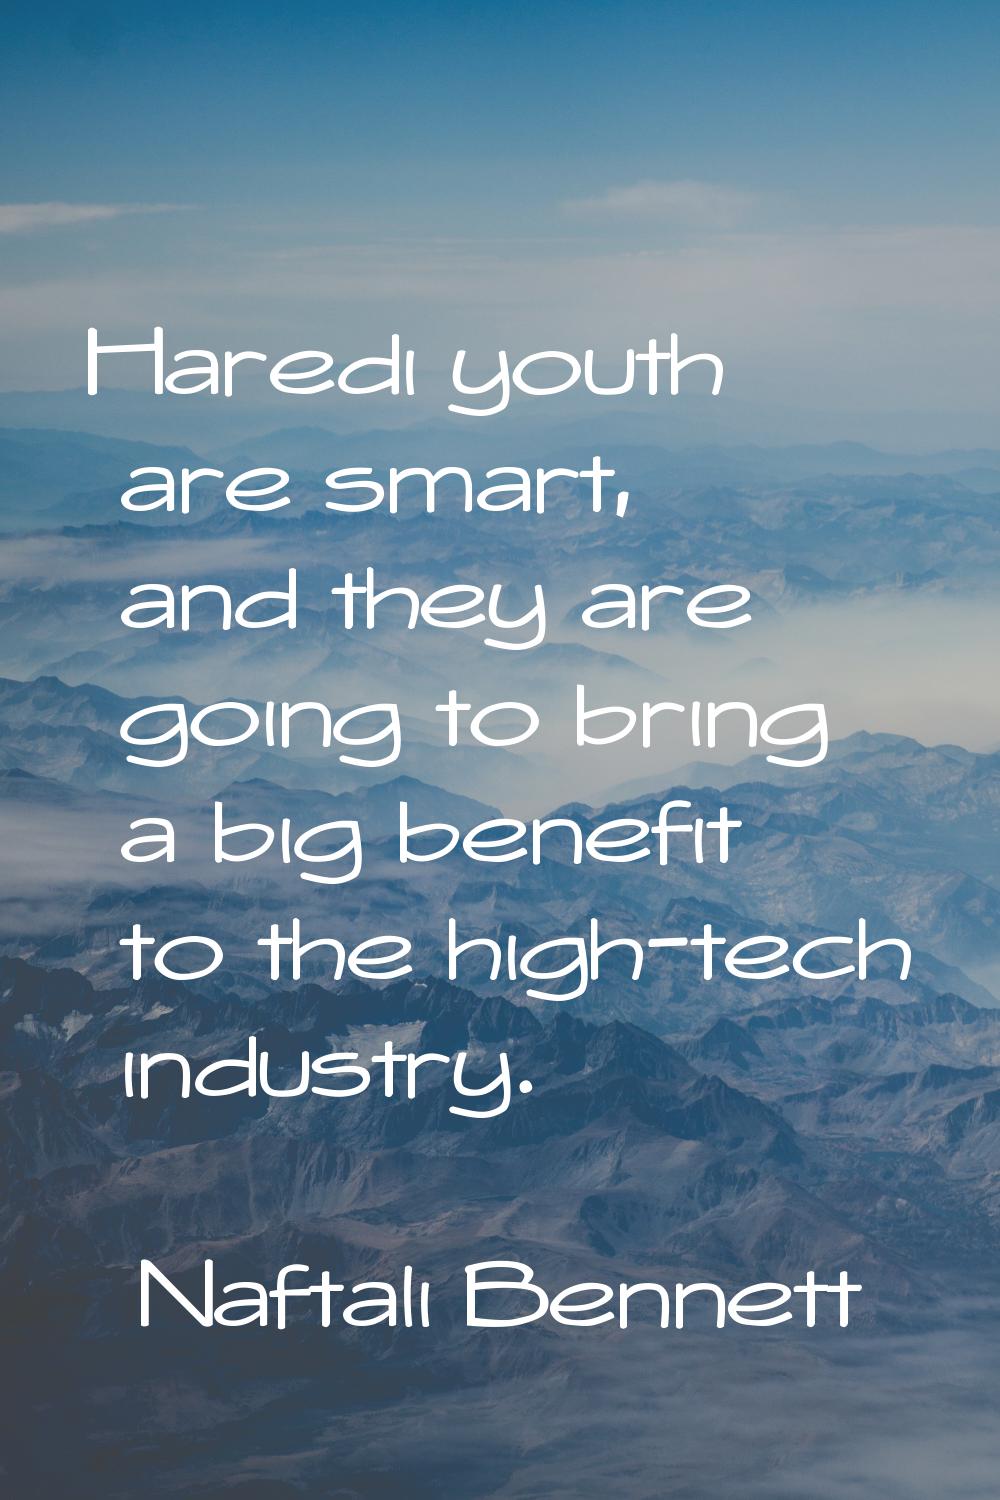 Haredi youth are smart, and they are going to bring a big benefit to the high-tech industry.